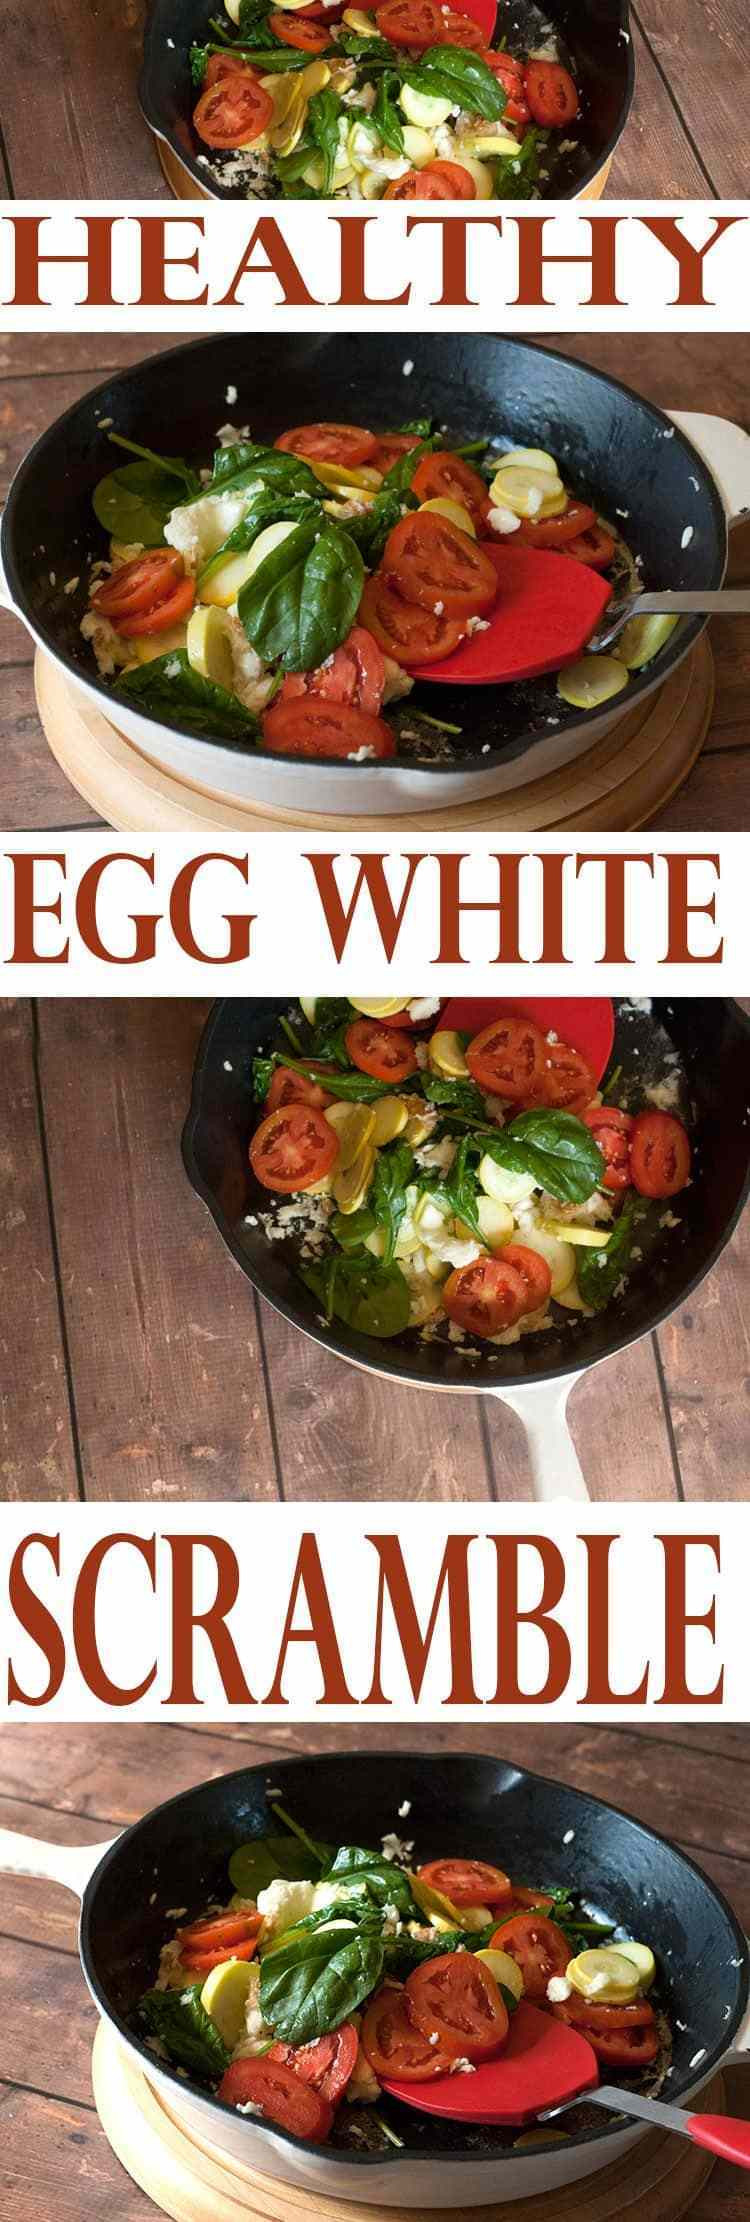 Healthy Egg Recipes For Weight Loss
 Healthy Egg White Scramble Healthy Recipes for Breakfast